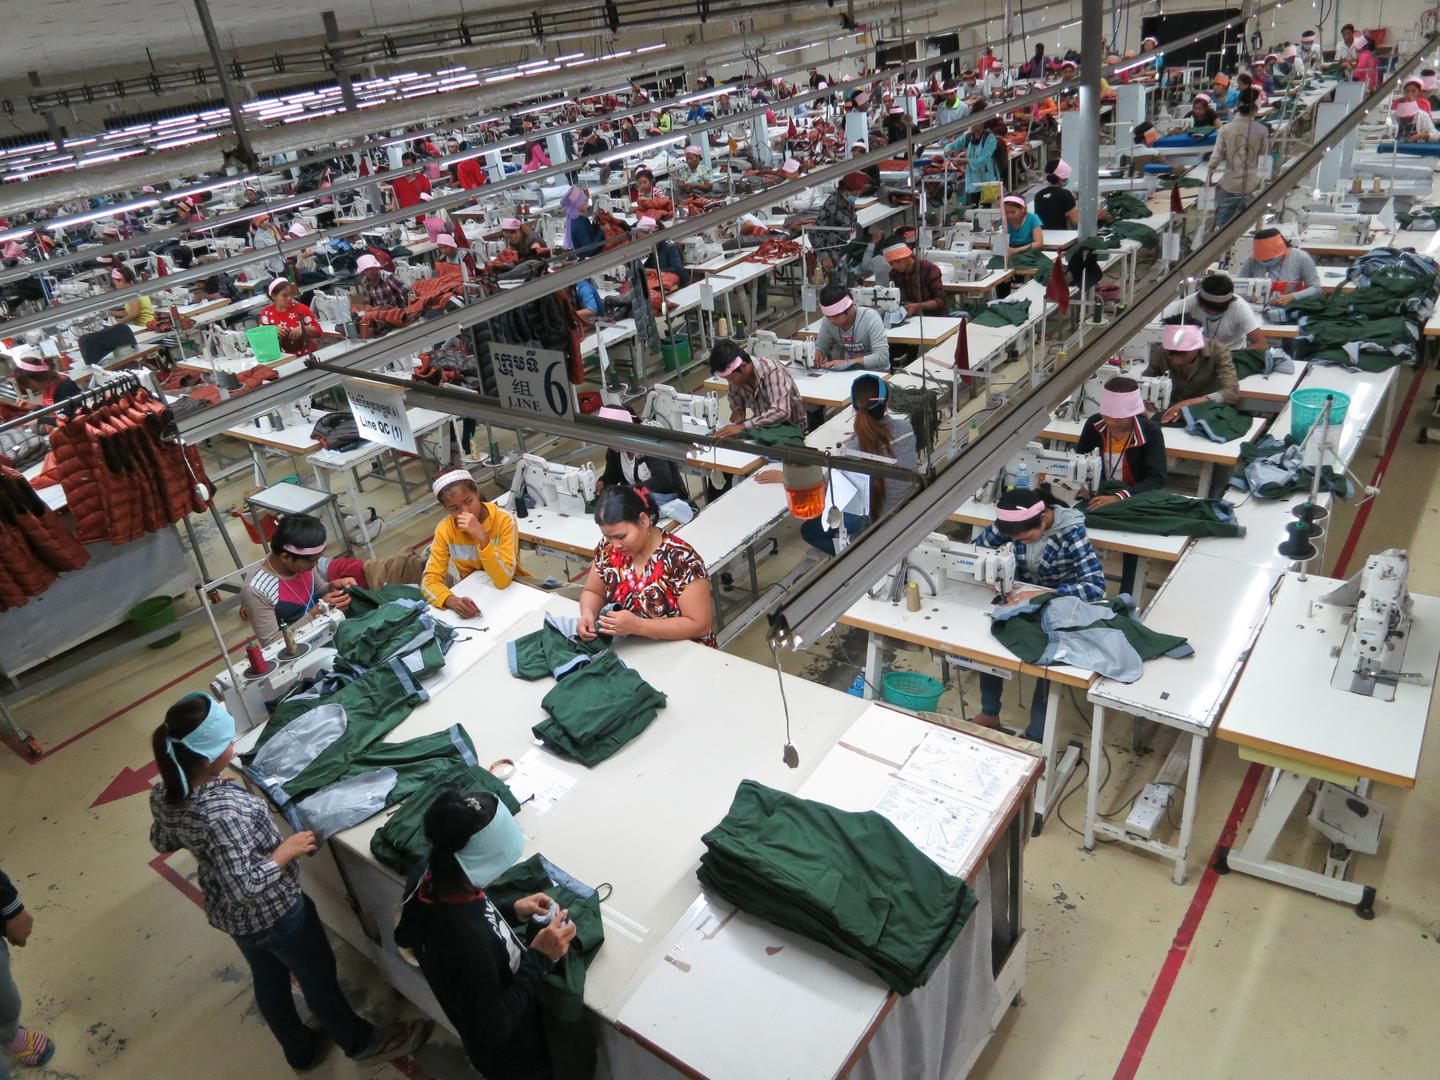 Women work in the sewing division of a factory in Phnom Penh, Cambodia's capital. Women constitute about 90 percent of the workforce in Cambodia's garment industry, which produces for many international apparel brands. Human Rights Watch has documented that workers in Cambodia frequently experience forced overtime, pregnancybased discrimination, and denial of paid maternity leave.